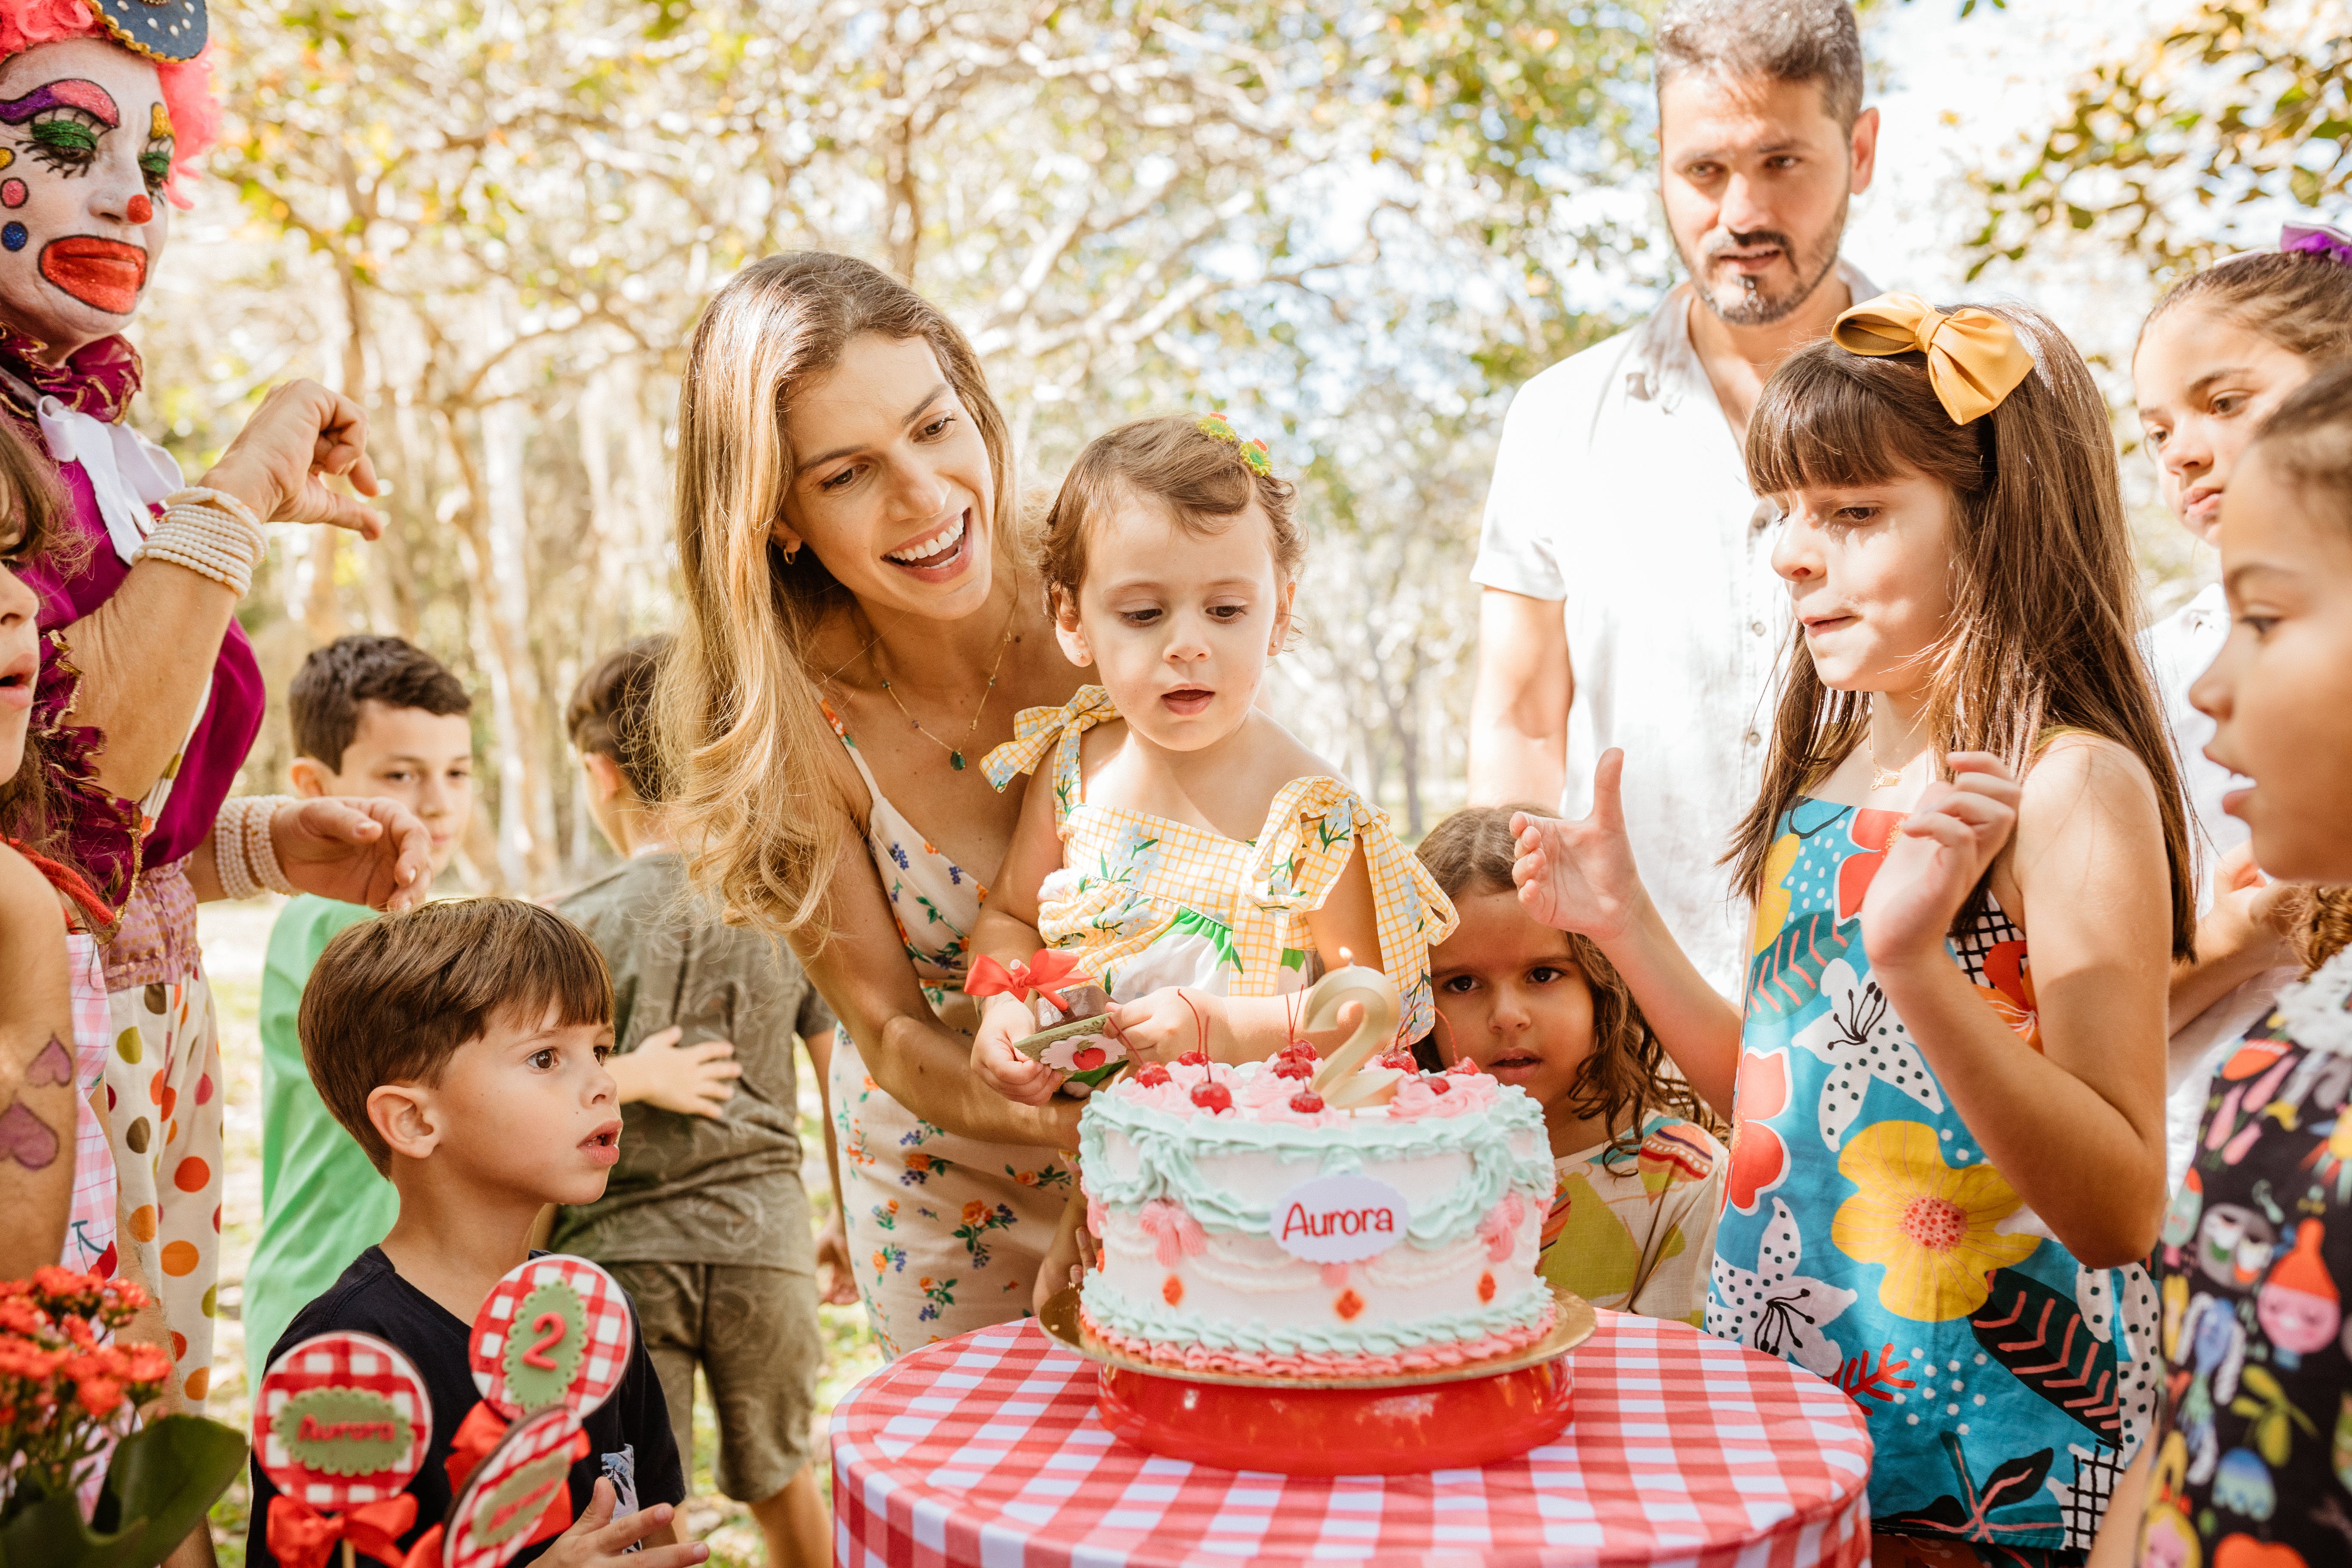 Child blowing out a candle on a cake at their birthday party. Parentings and children are gathered around the cake.